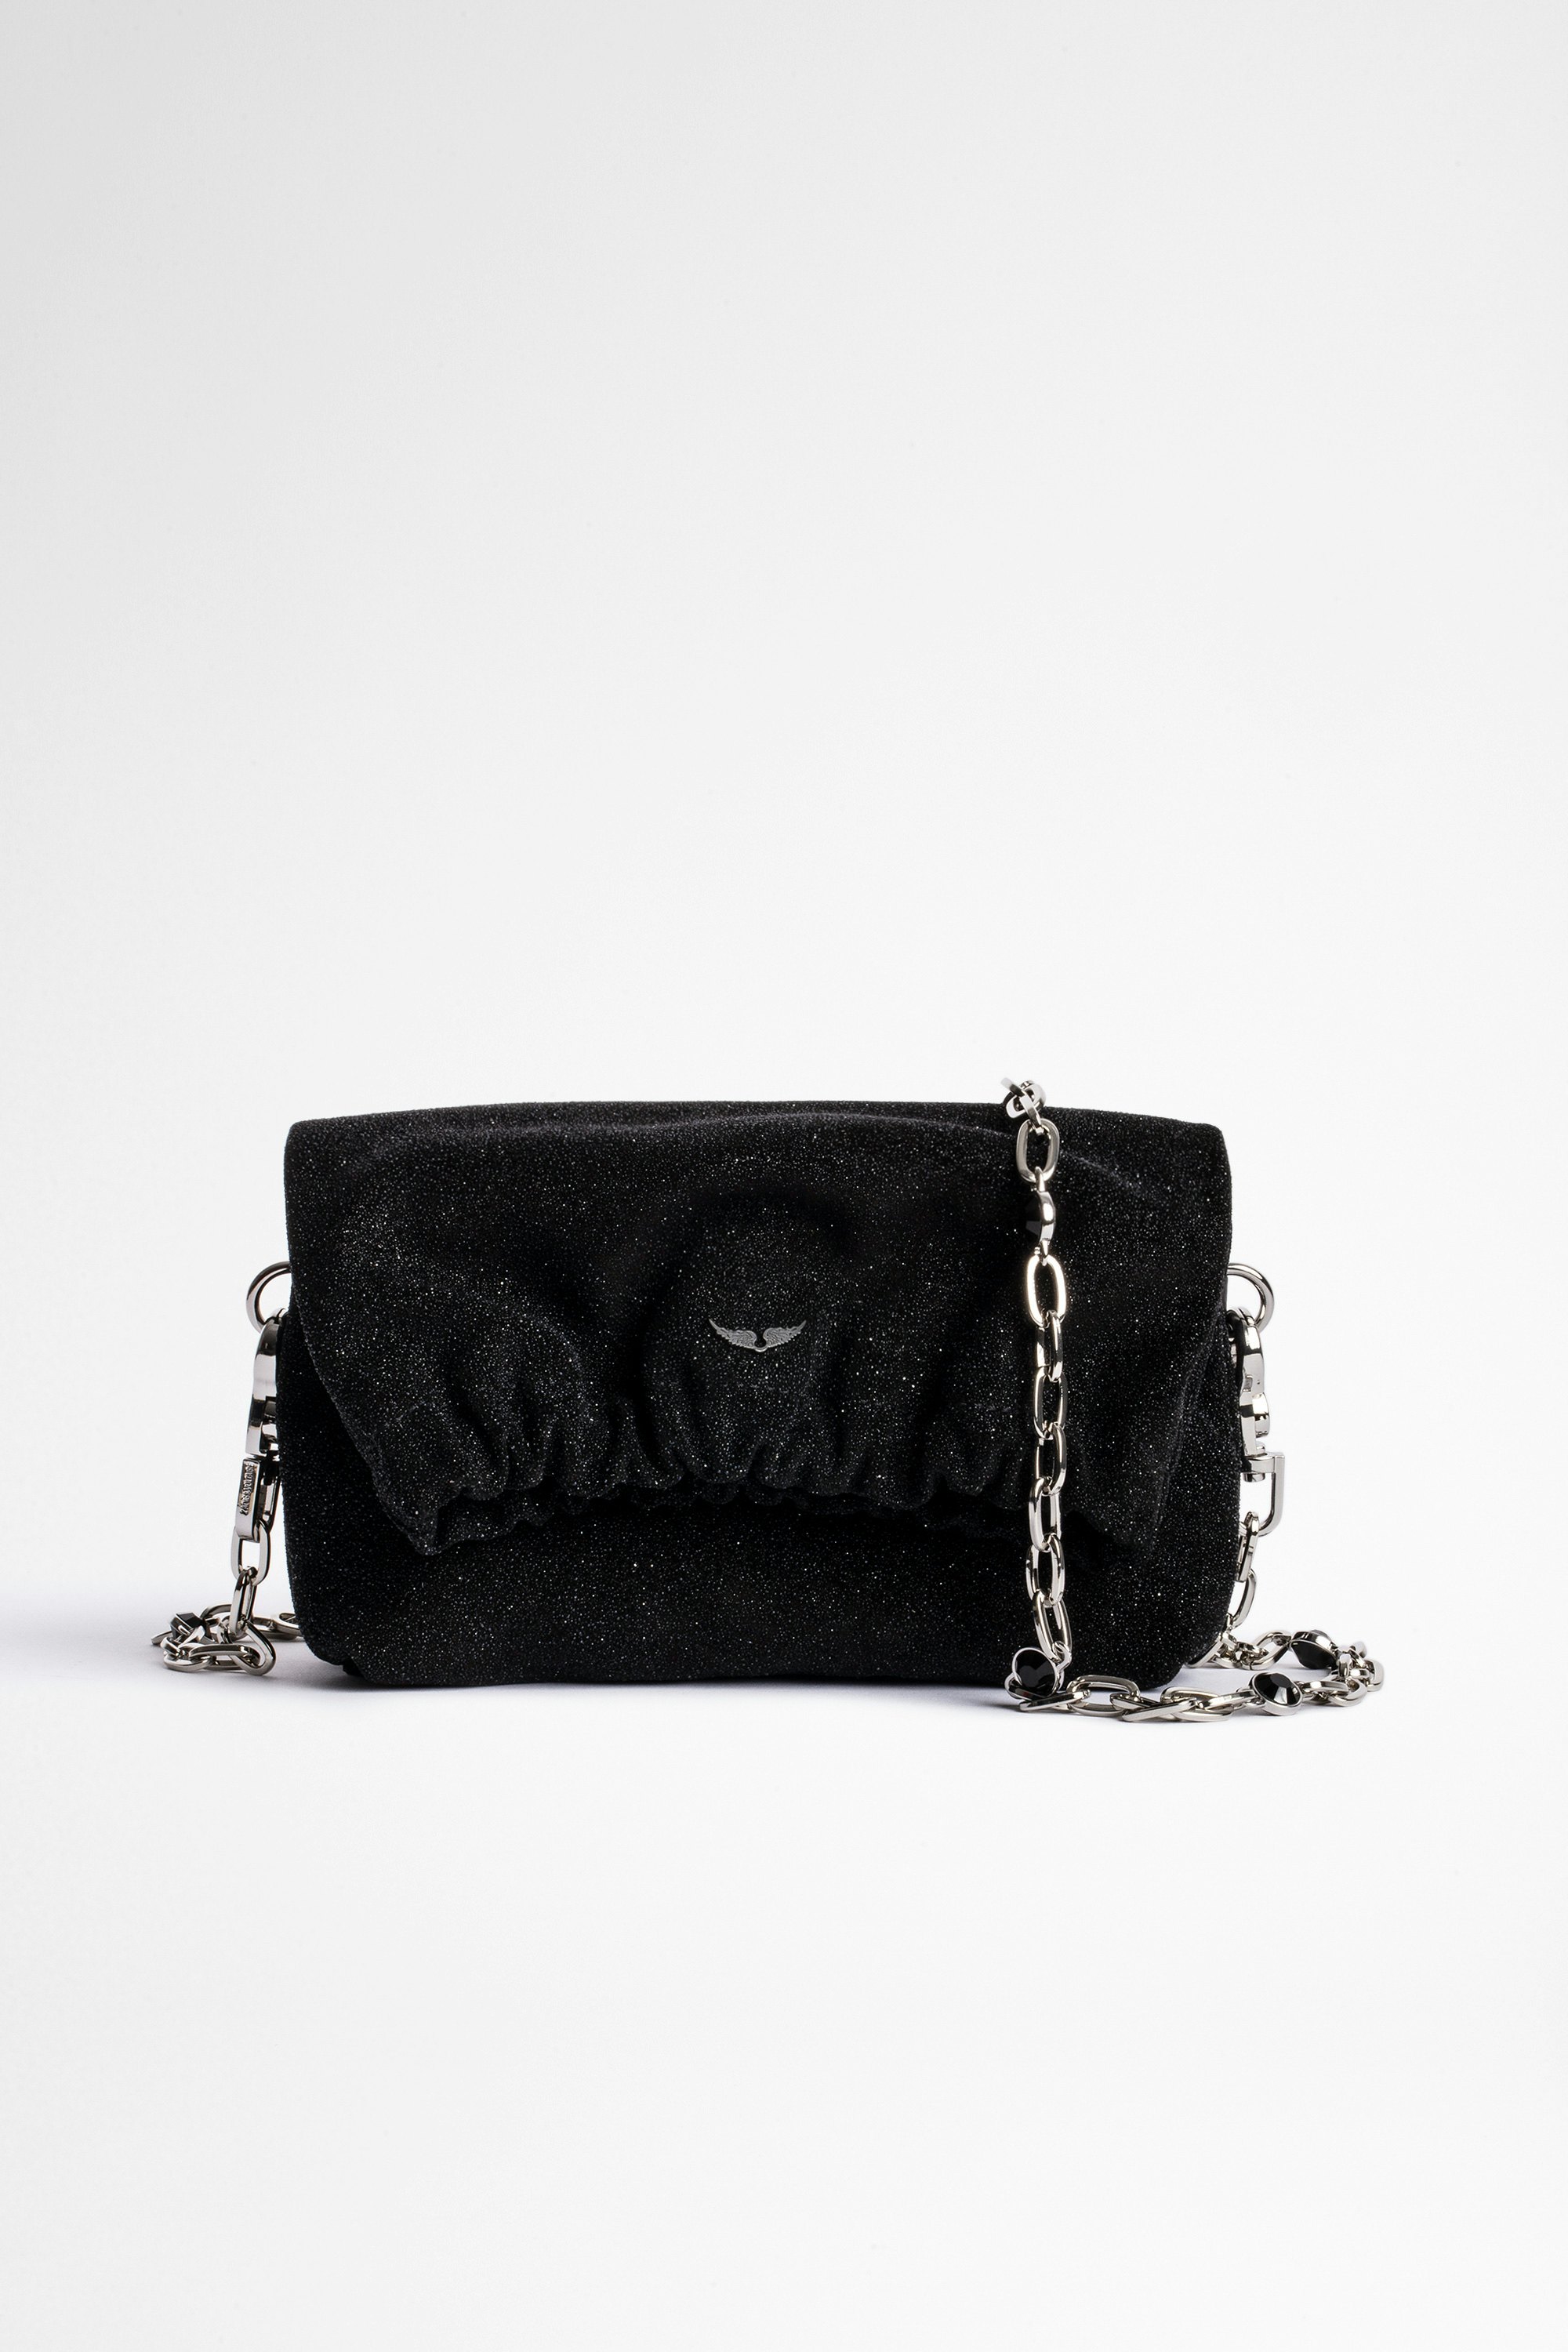 Rockyssime XS バッグ Women’s leather clutch in black with silver chain handle